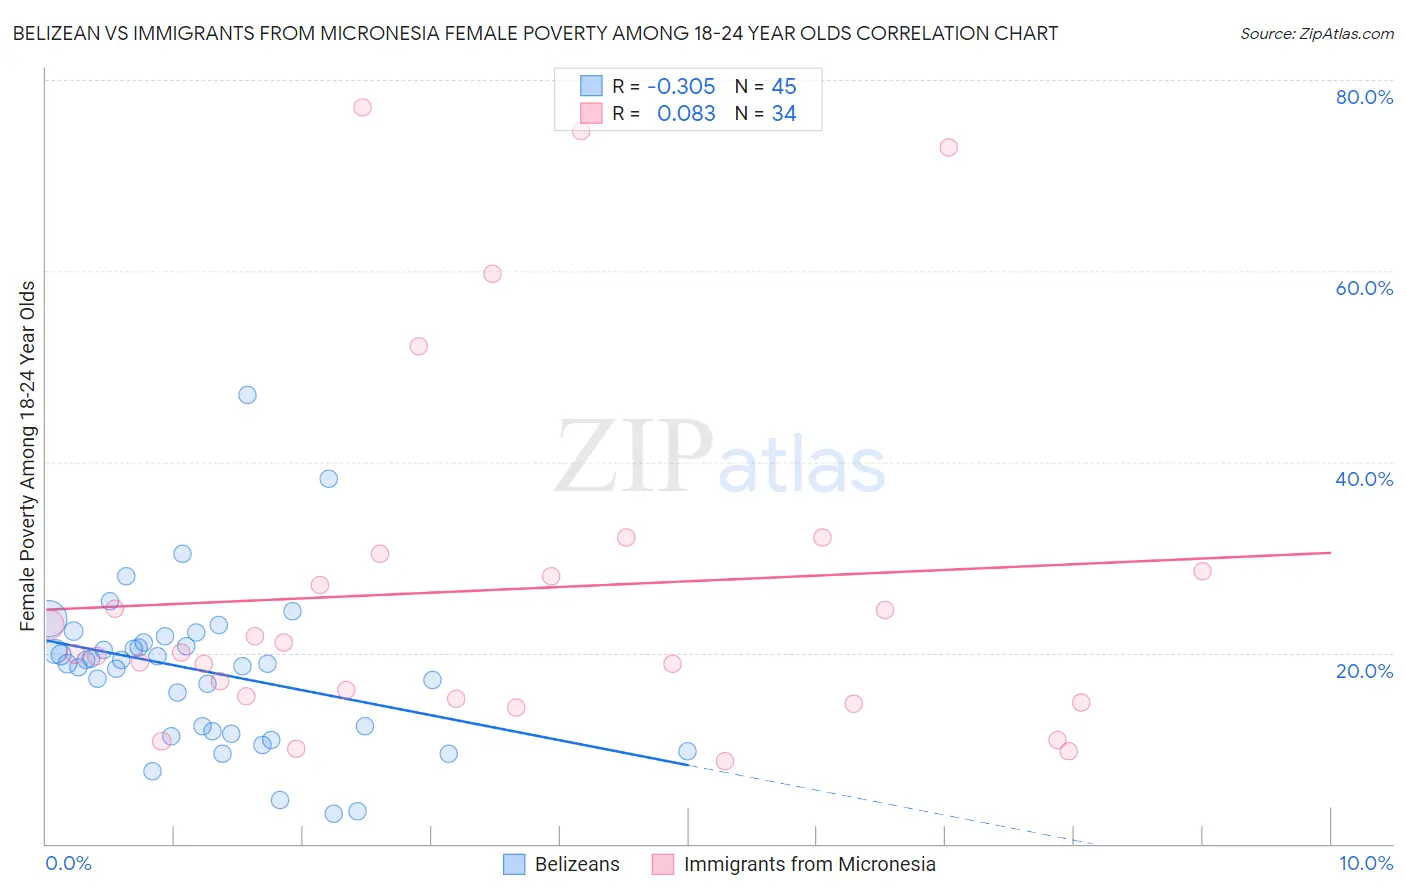 Belizean vs Immigrants from Micronesia Female Poverty Among 18-24 Year Olds